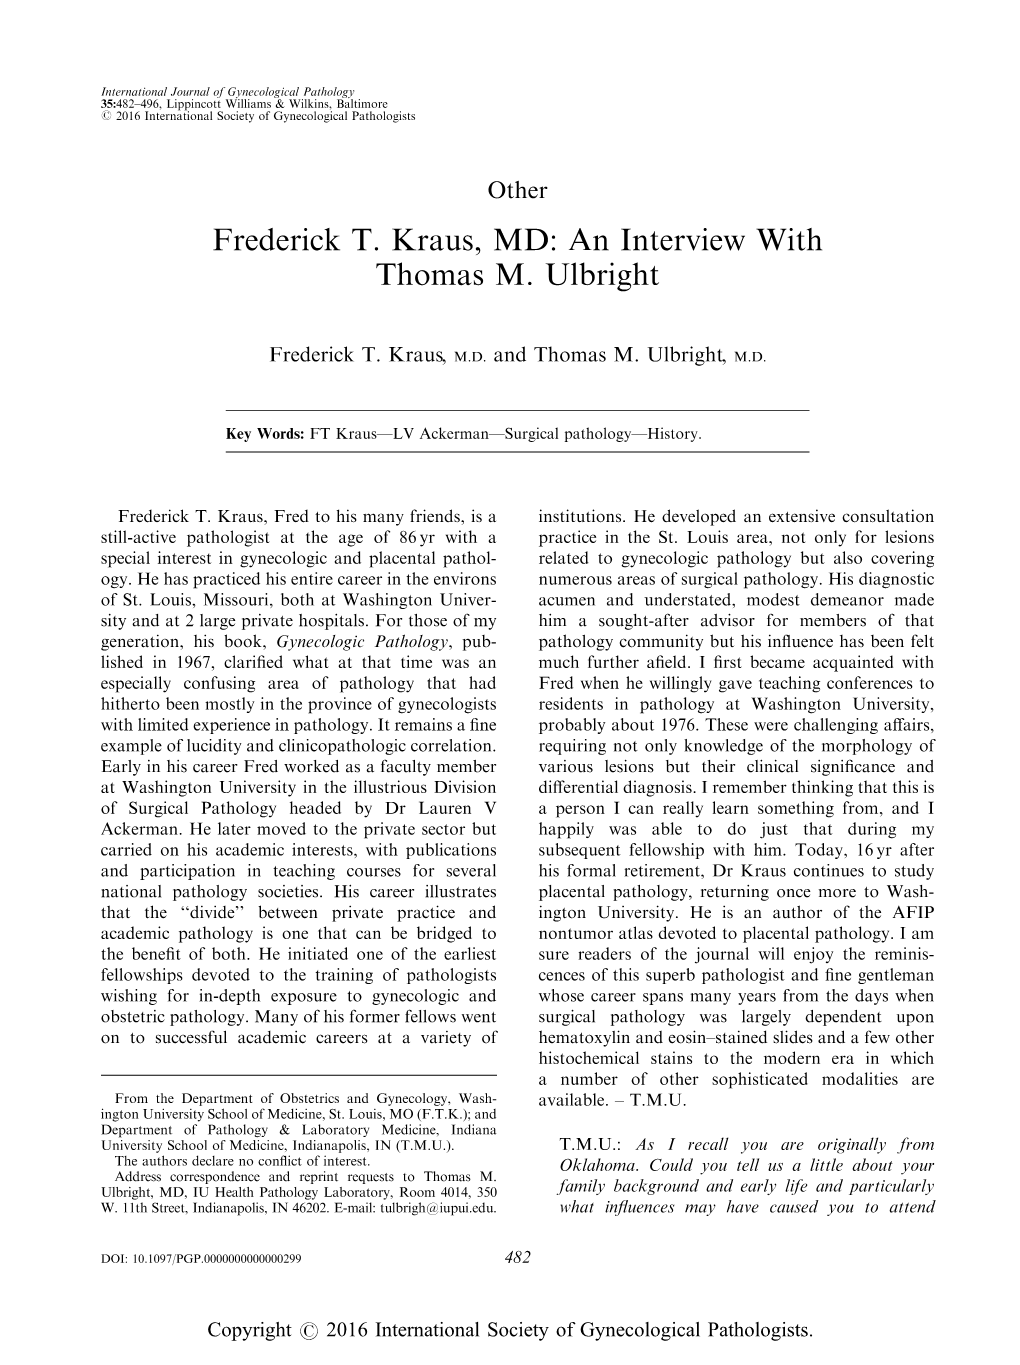 Frederick T. Kraus, MD: an Interview with Thomas M